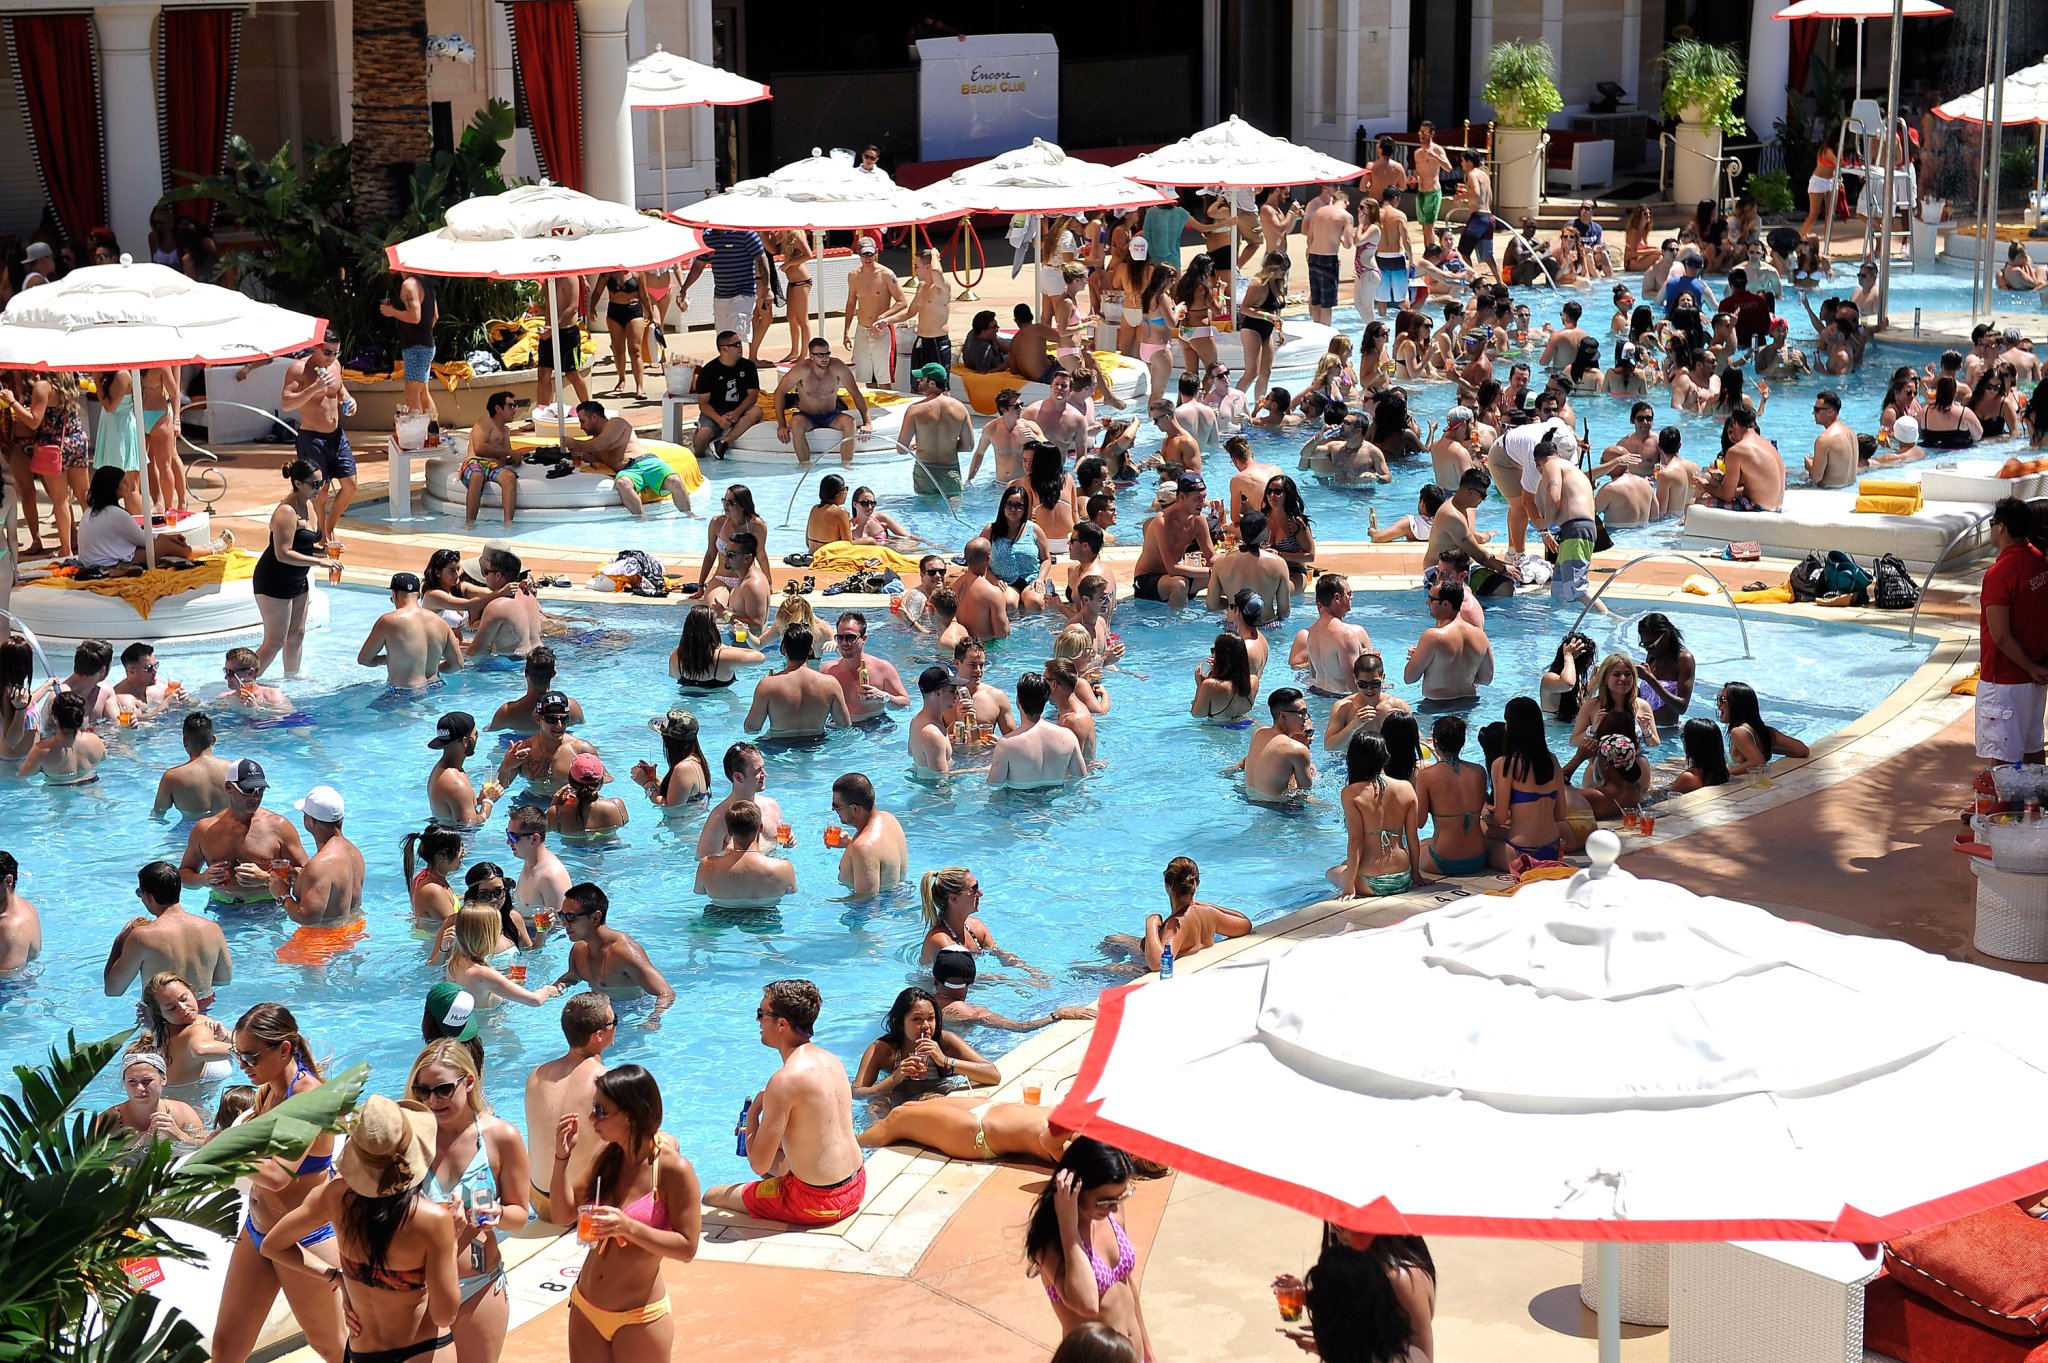 Dude's Insane Bar Tab From Las Vegas Hotel Pool Party Over Memorial Day Weekend Is Why I Drink At Chili's